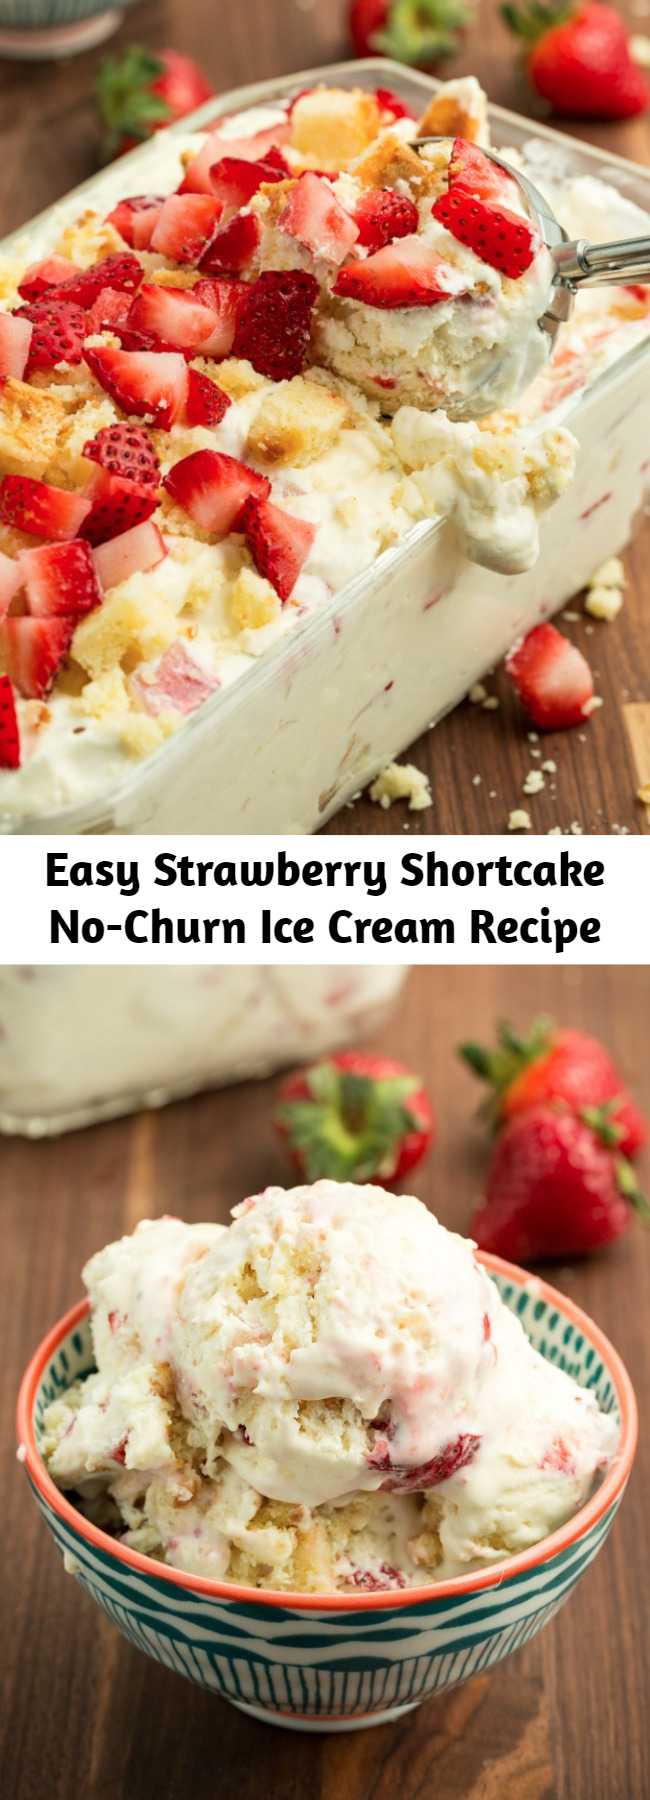 Easy Strawberry Shortcake No-Churn Ice Cream Recipe - Our strawberry shortcake ice cream is the best way to eat strawberries right now. It has five ingredients and takes 10 minutes to make. This no-churn ice cream tastes like love at first sight.